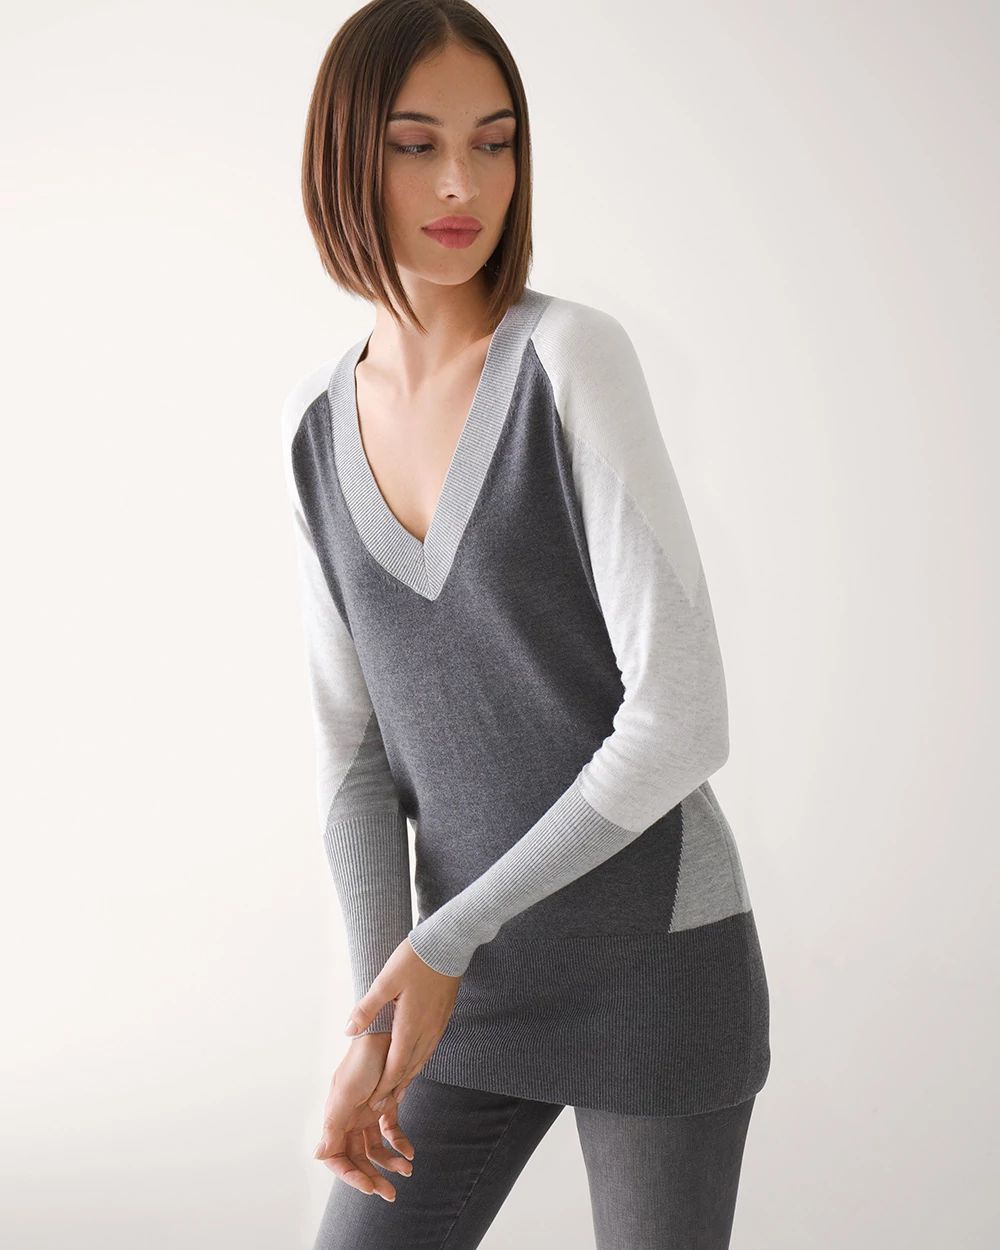 Long Sleeve Color Block Tunic click to view larger image.